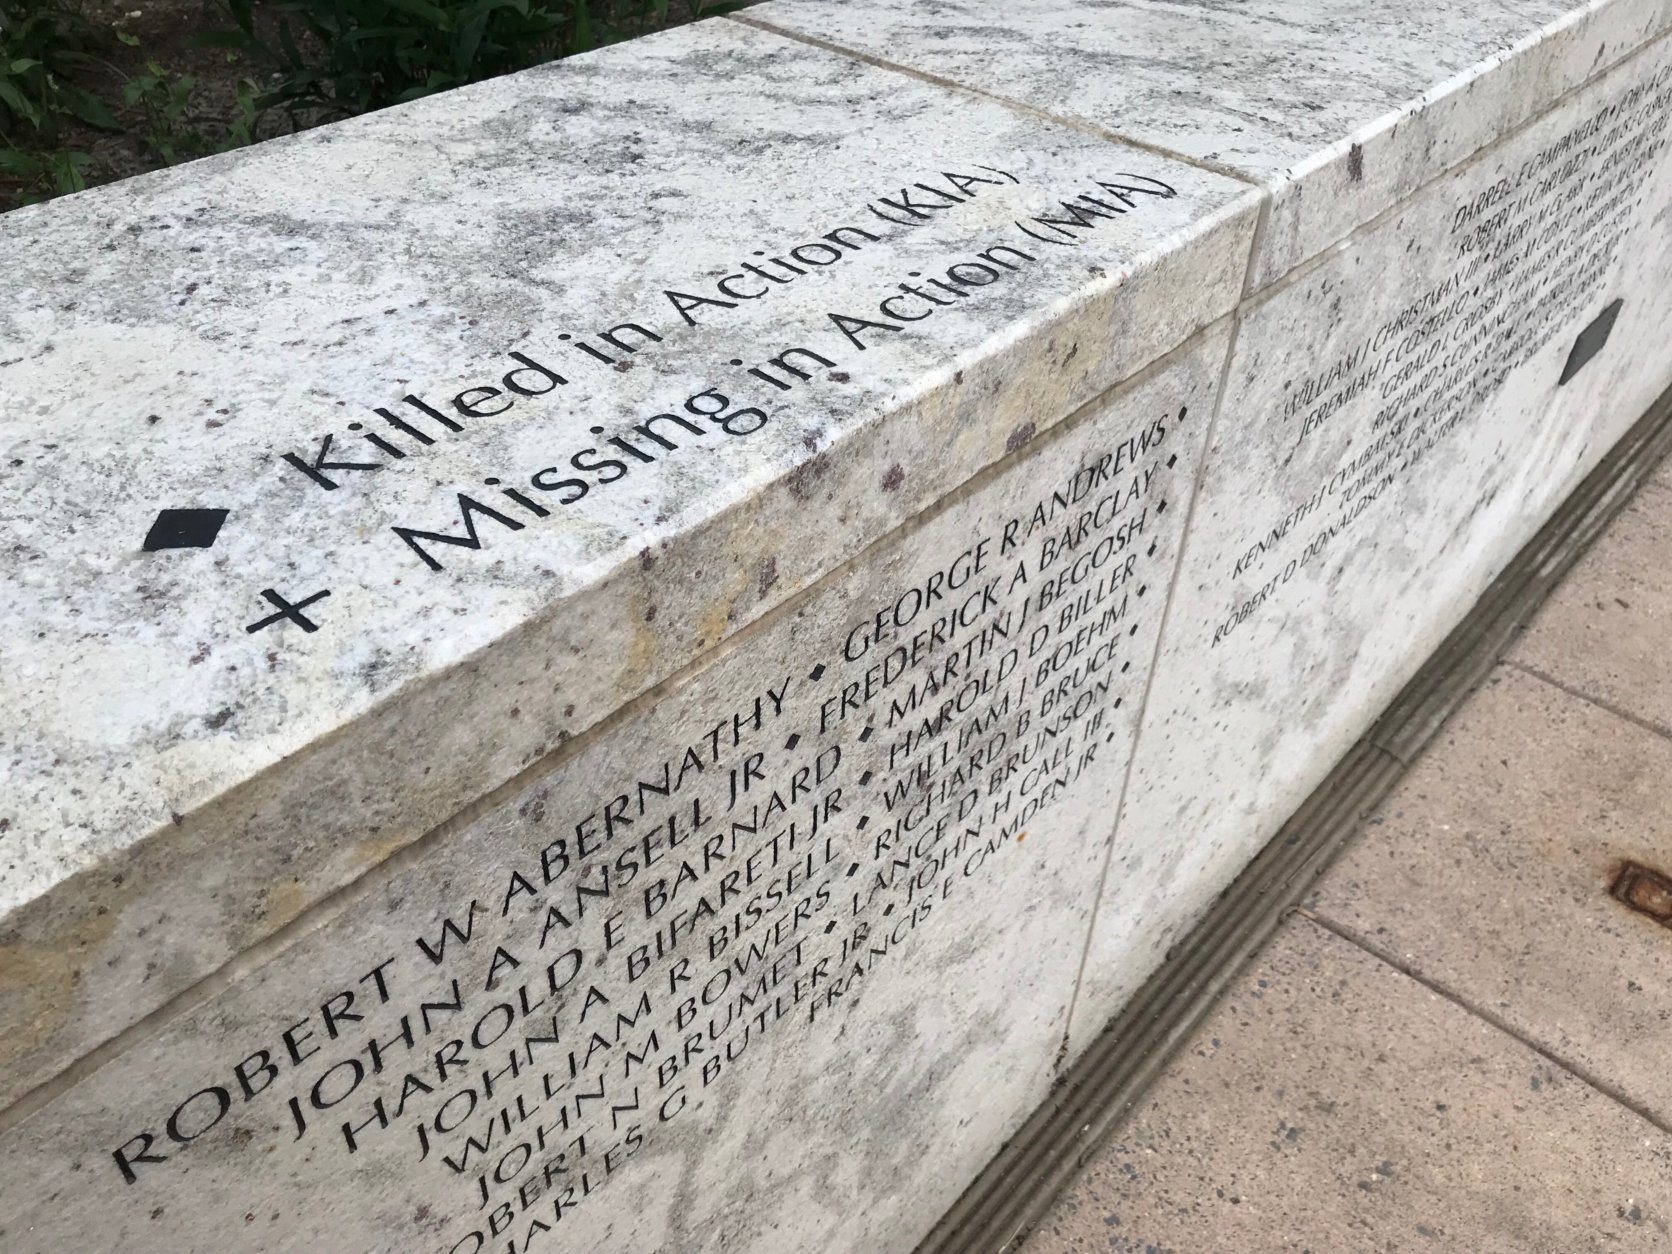  One of the names engraved in the memorial is that of Tommy Moffitt, who was killed in action in Vietnam, at the age of 18. (WTOP/Michelle Basch)